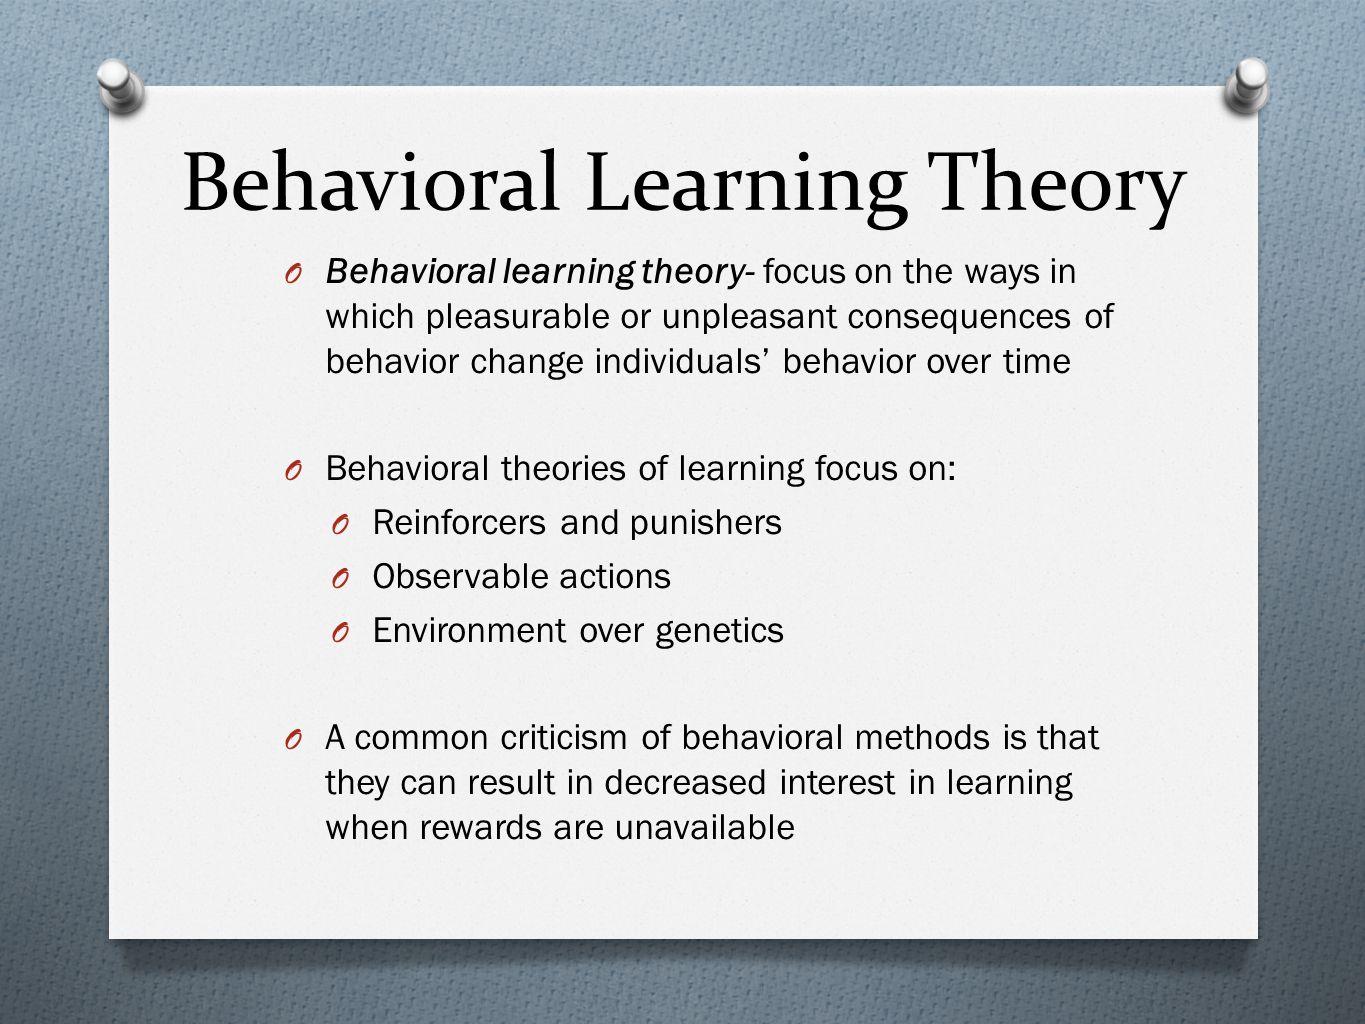 Behavioral Learning Theory.